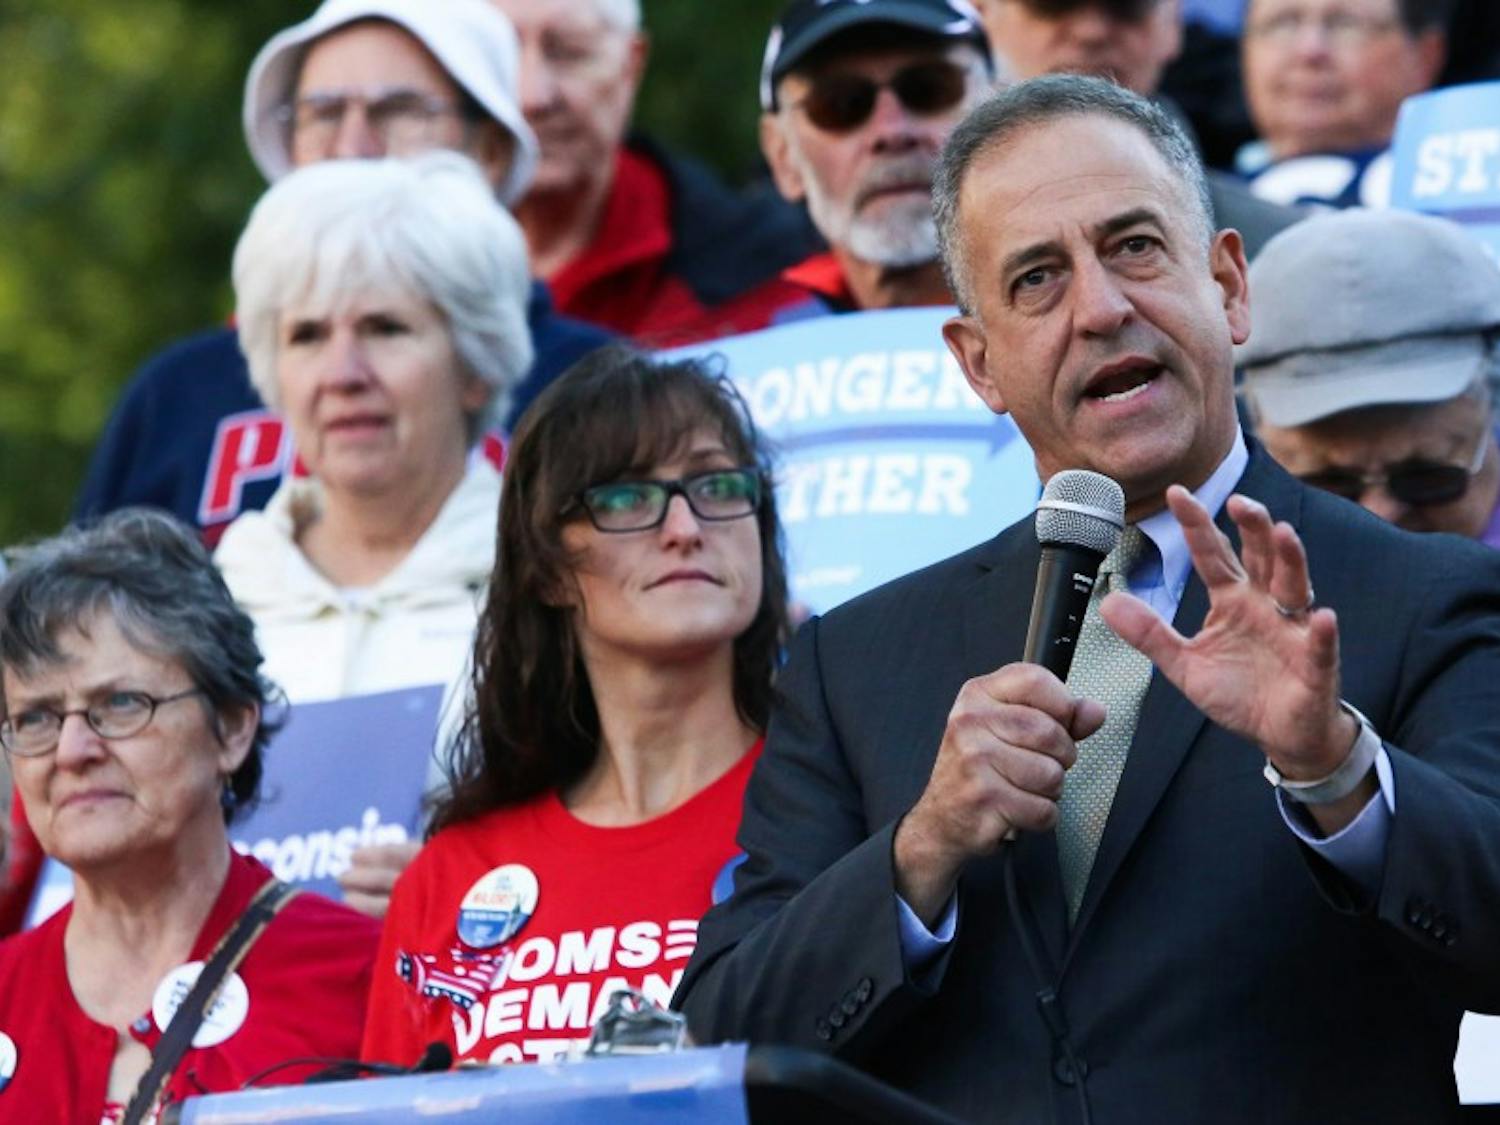 Democratic Senate candidate Russ Feingold led Wisconsin Democrats in encouraging Madison residents to vote early in a rally Monday.